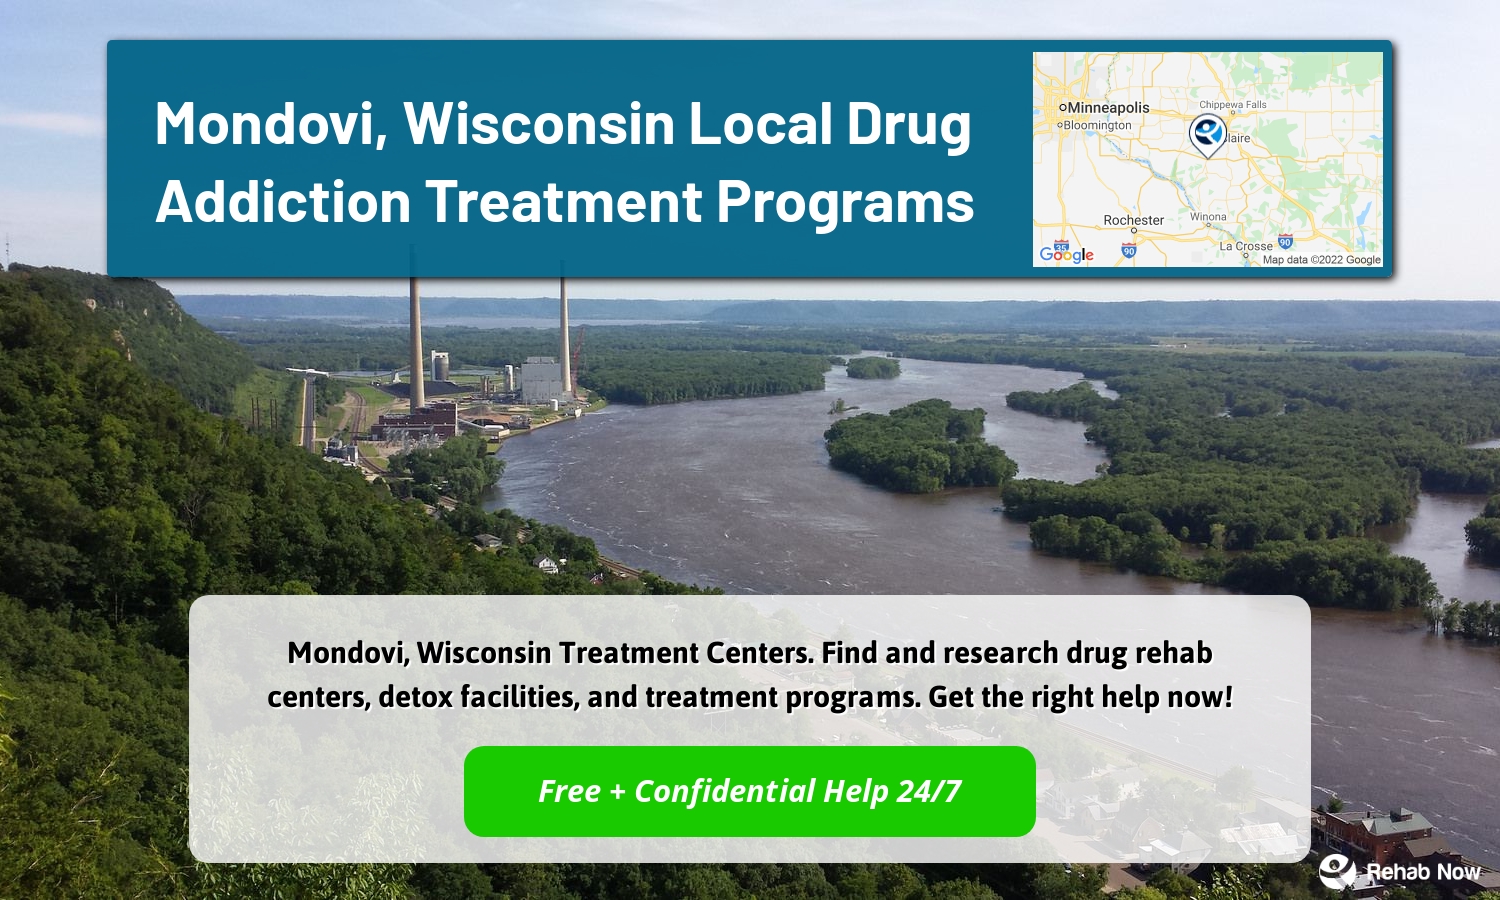 Mondovi, Wisconsin Treatment Centers. Find and research drug rehab centers, detox facilities, and treatment programs. Get the right help now!